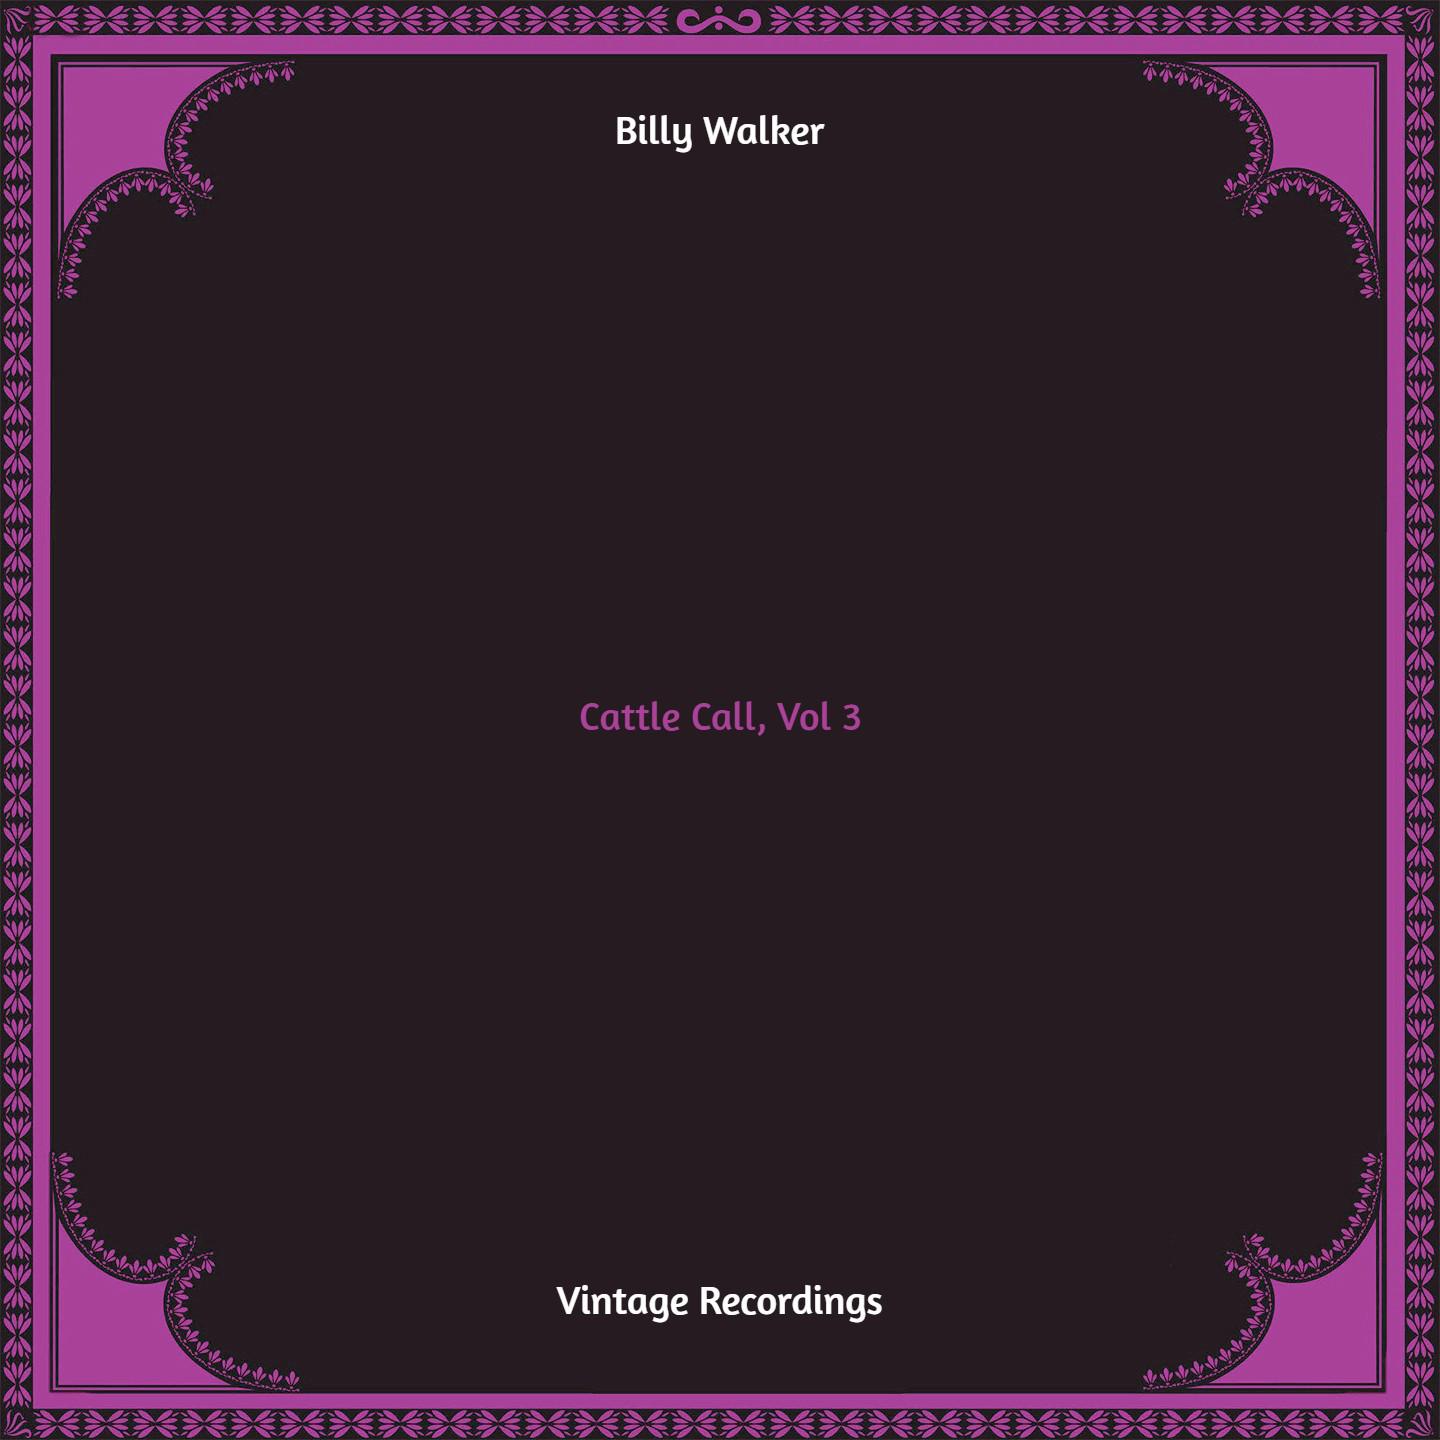 Cattle Call, Vol. 3 (Hq remastered)